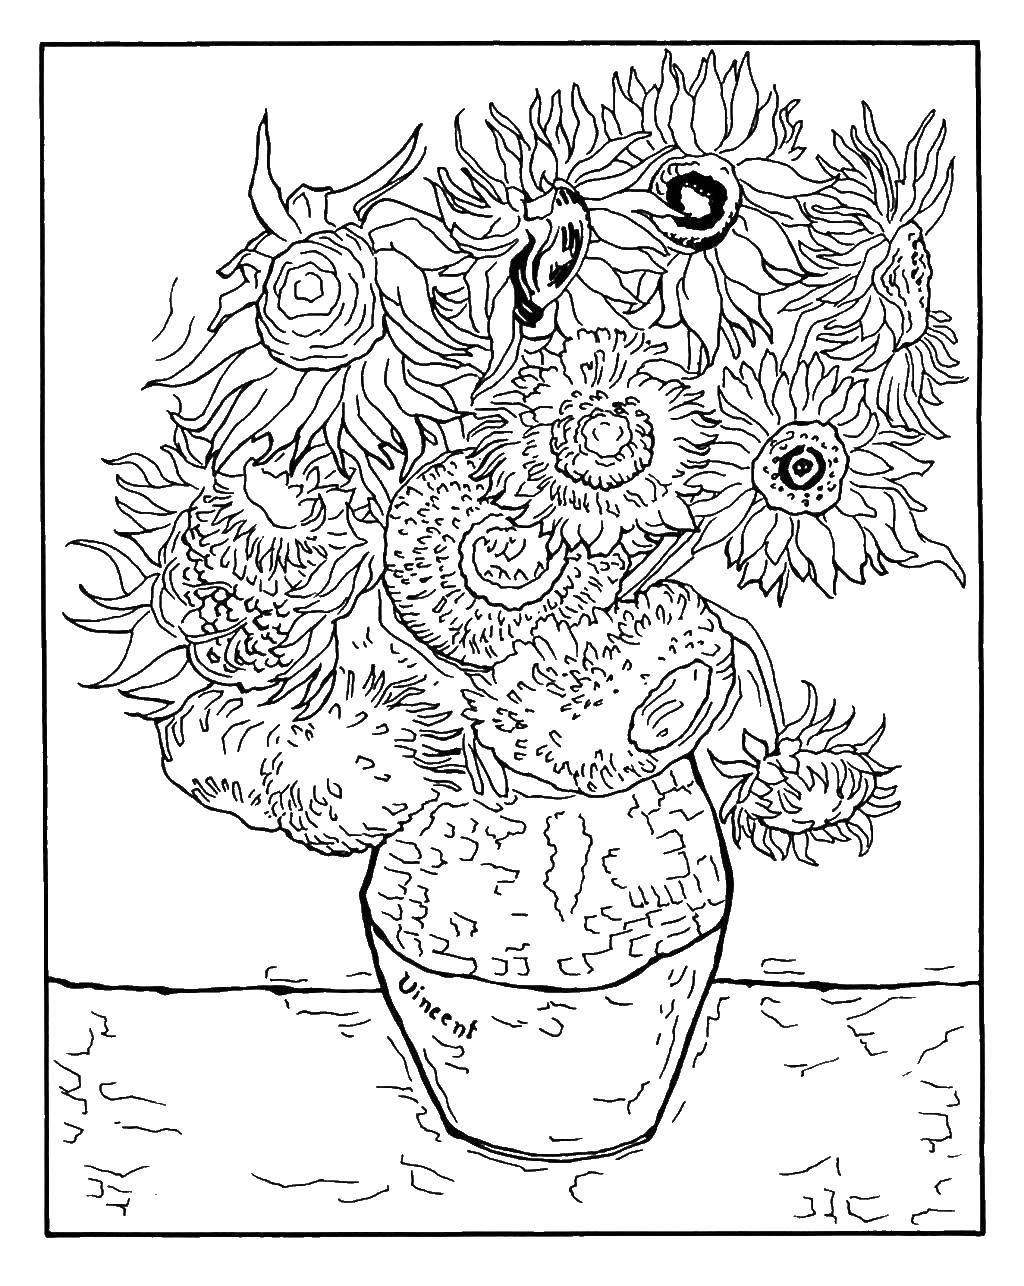 Coloring Flowers in a vase. Category flowers. Tags:  Flowers, bouquet, vase.